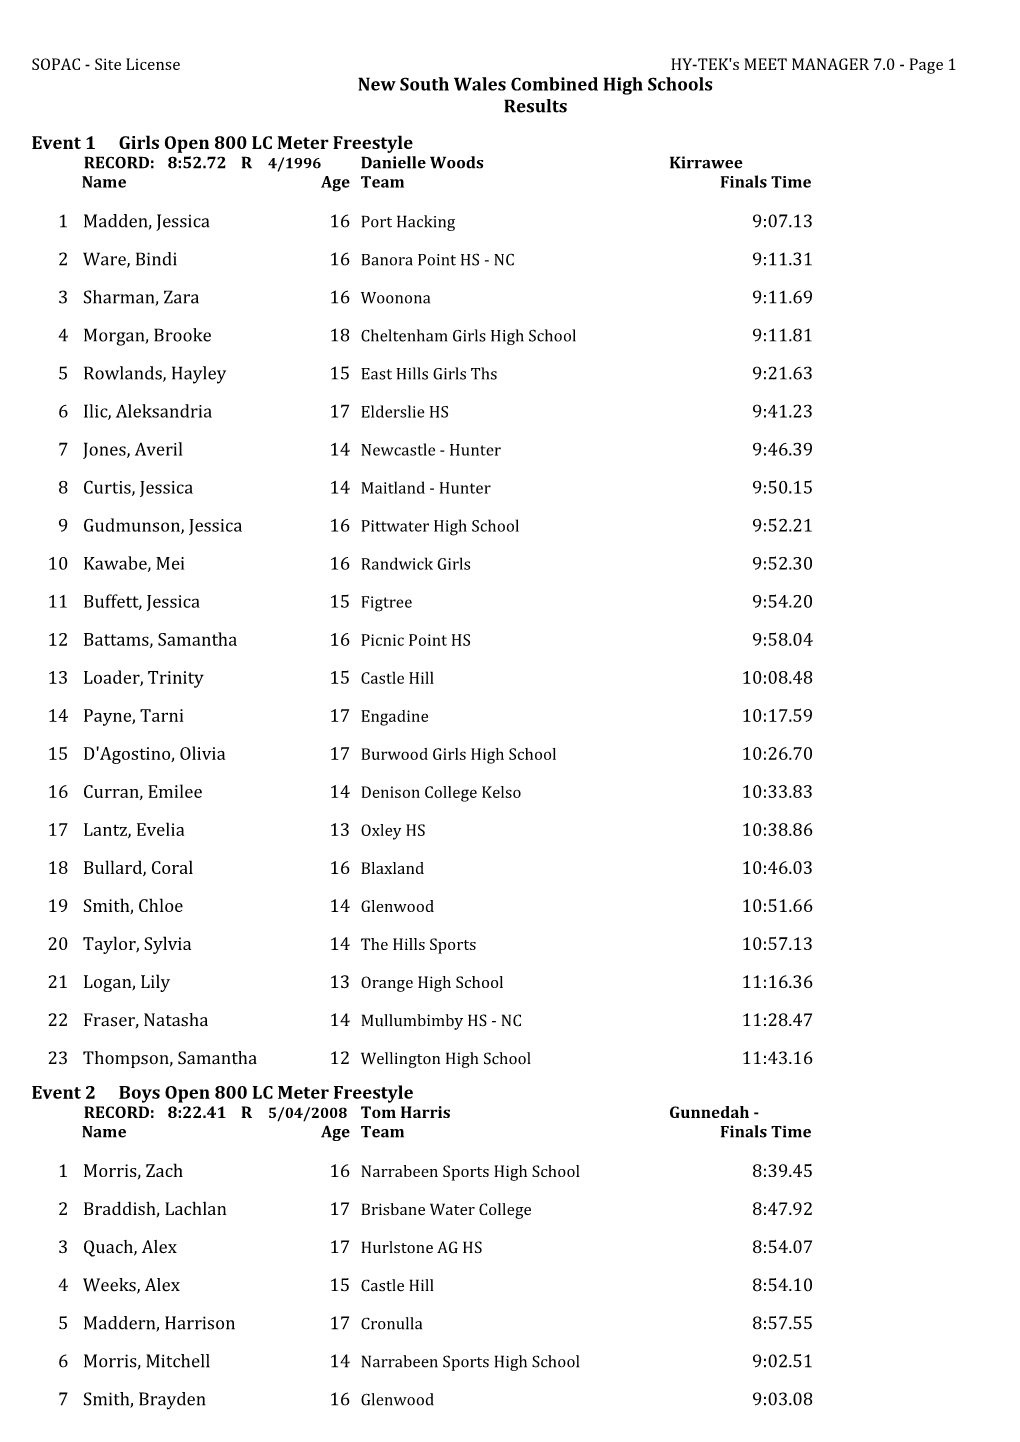 New South Wales Combined High Schools Results Event 1 Girls Open